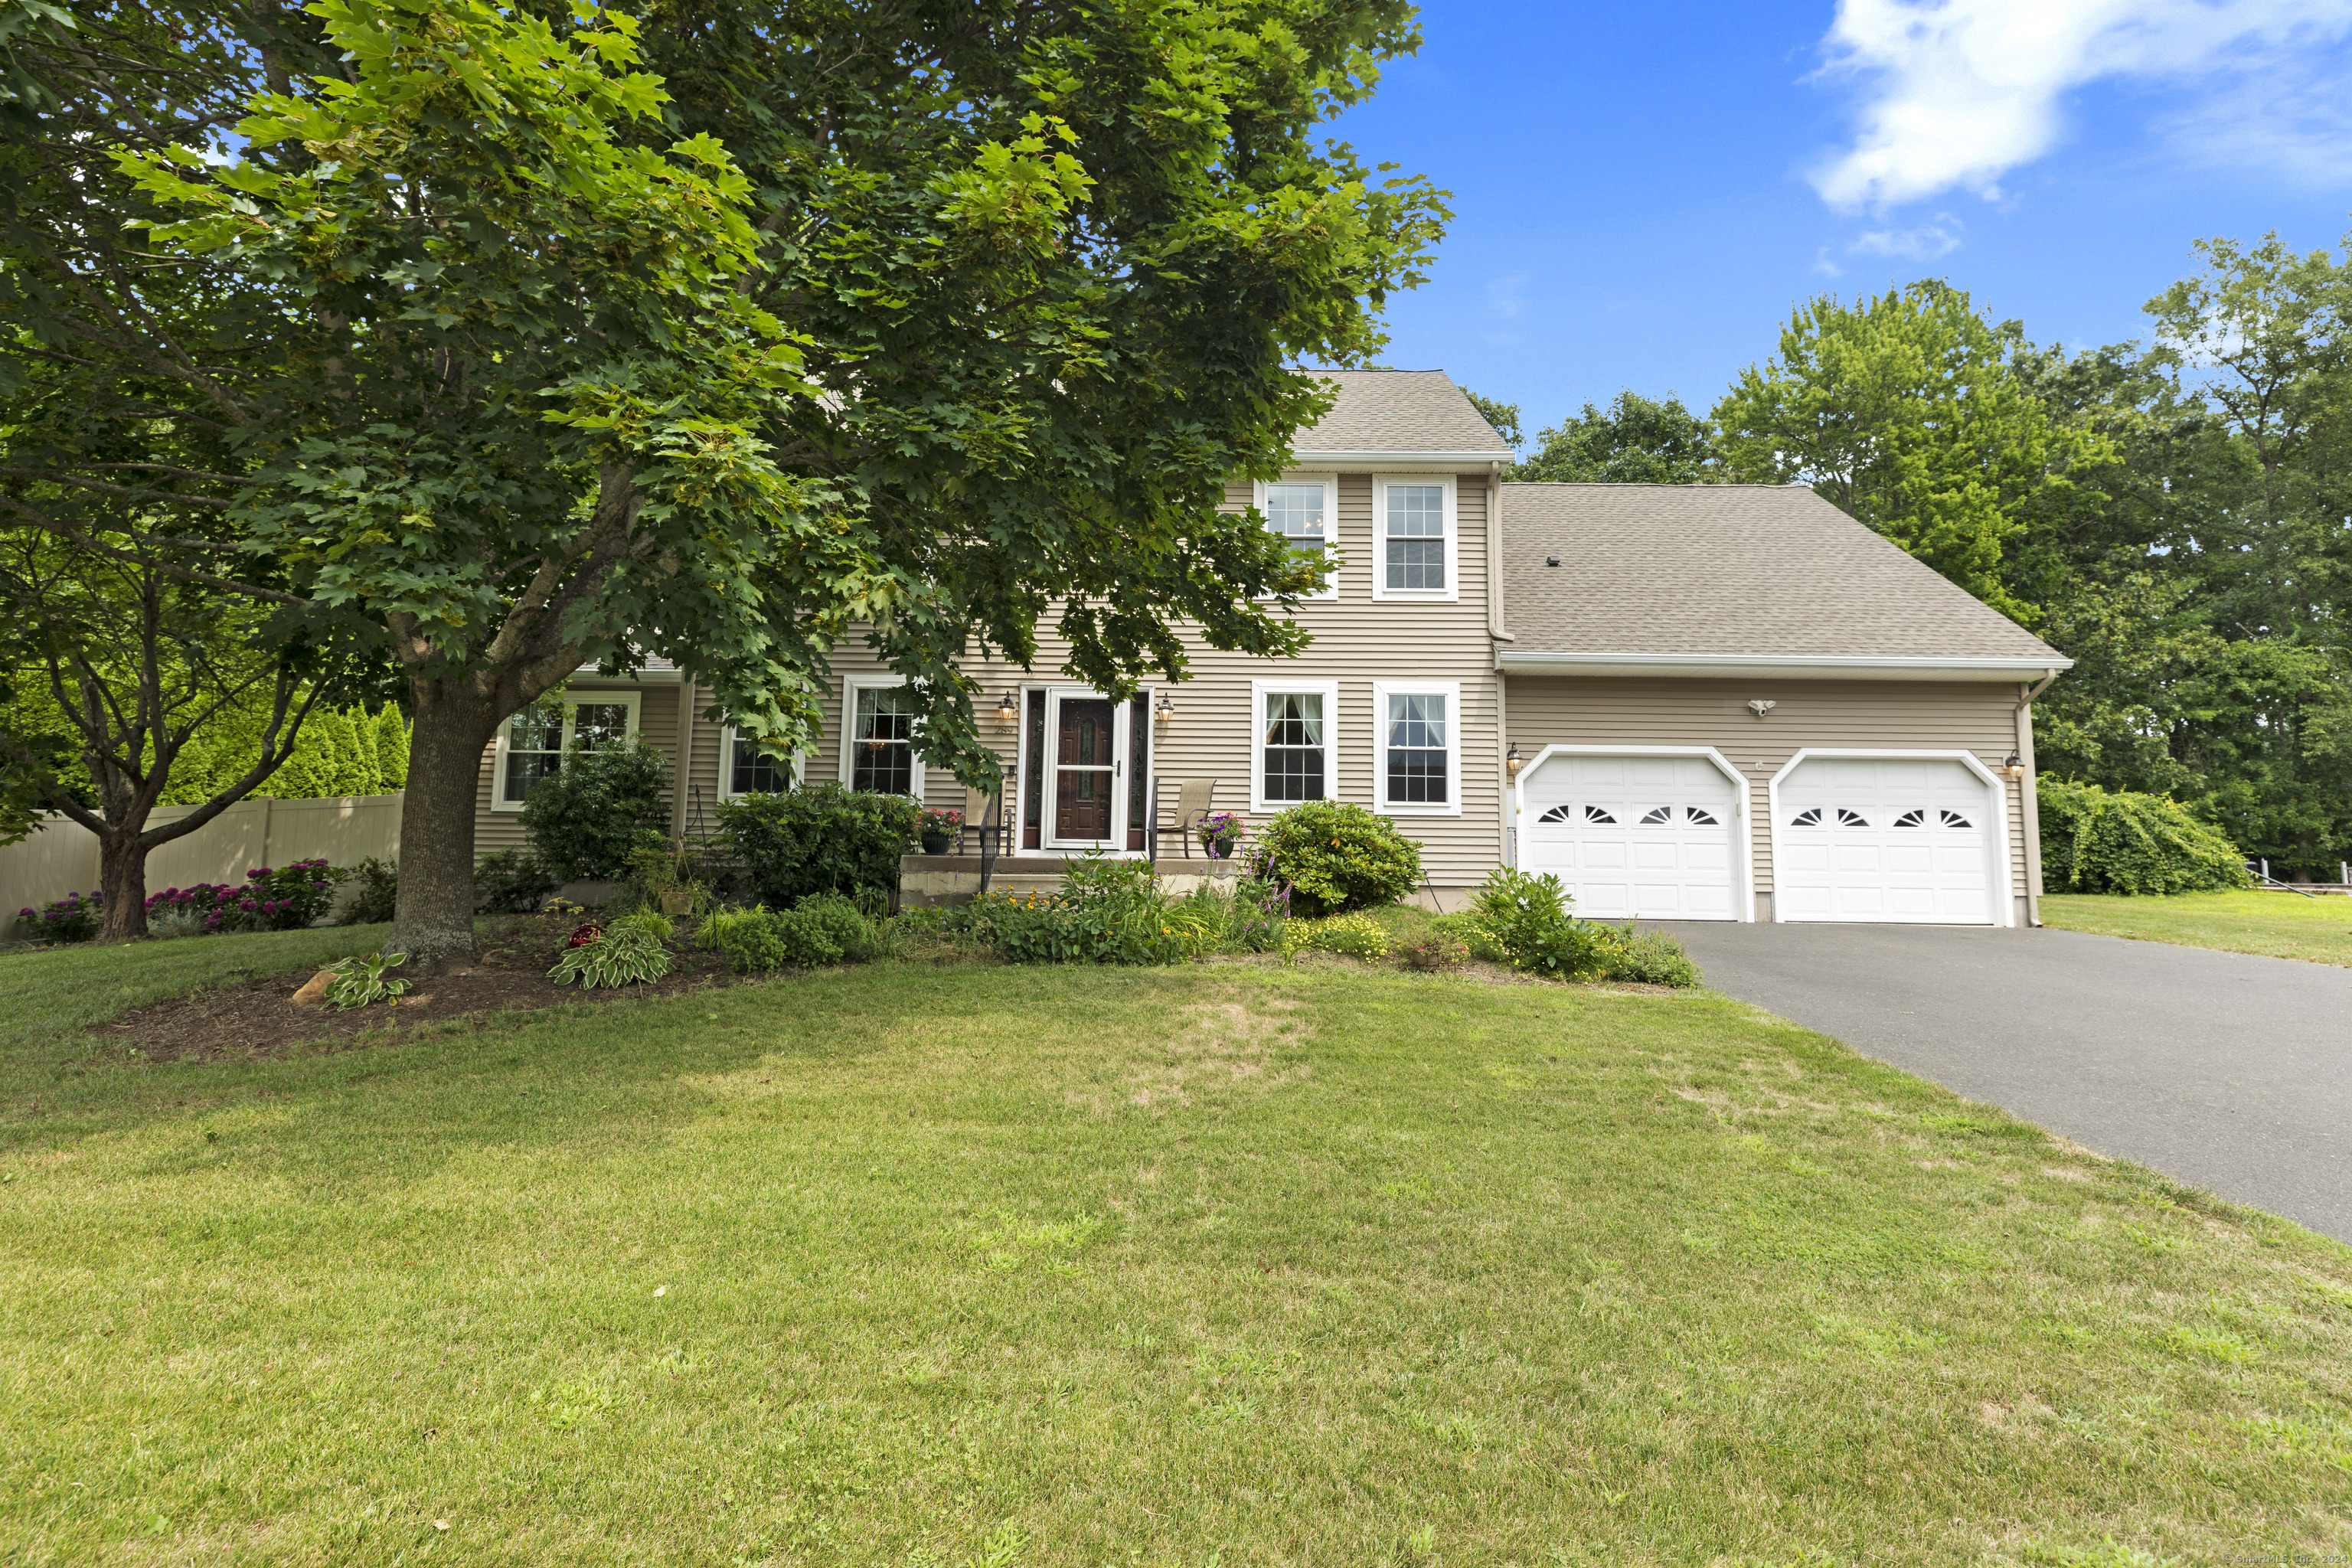 289 Meadowbrook Drive, Manchester, Connecticut - 4 Bedrooms  
3.5 Bathrooms  
8 Rooms - 